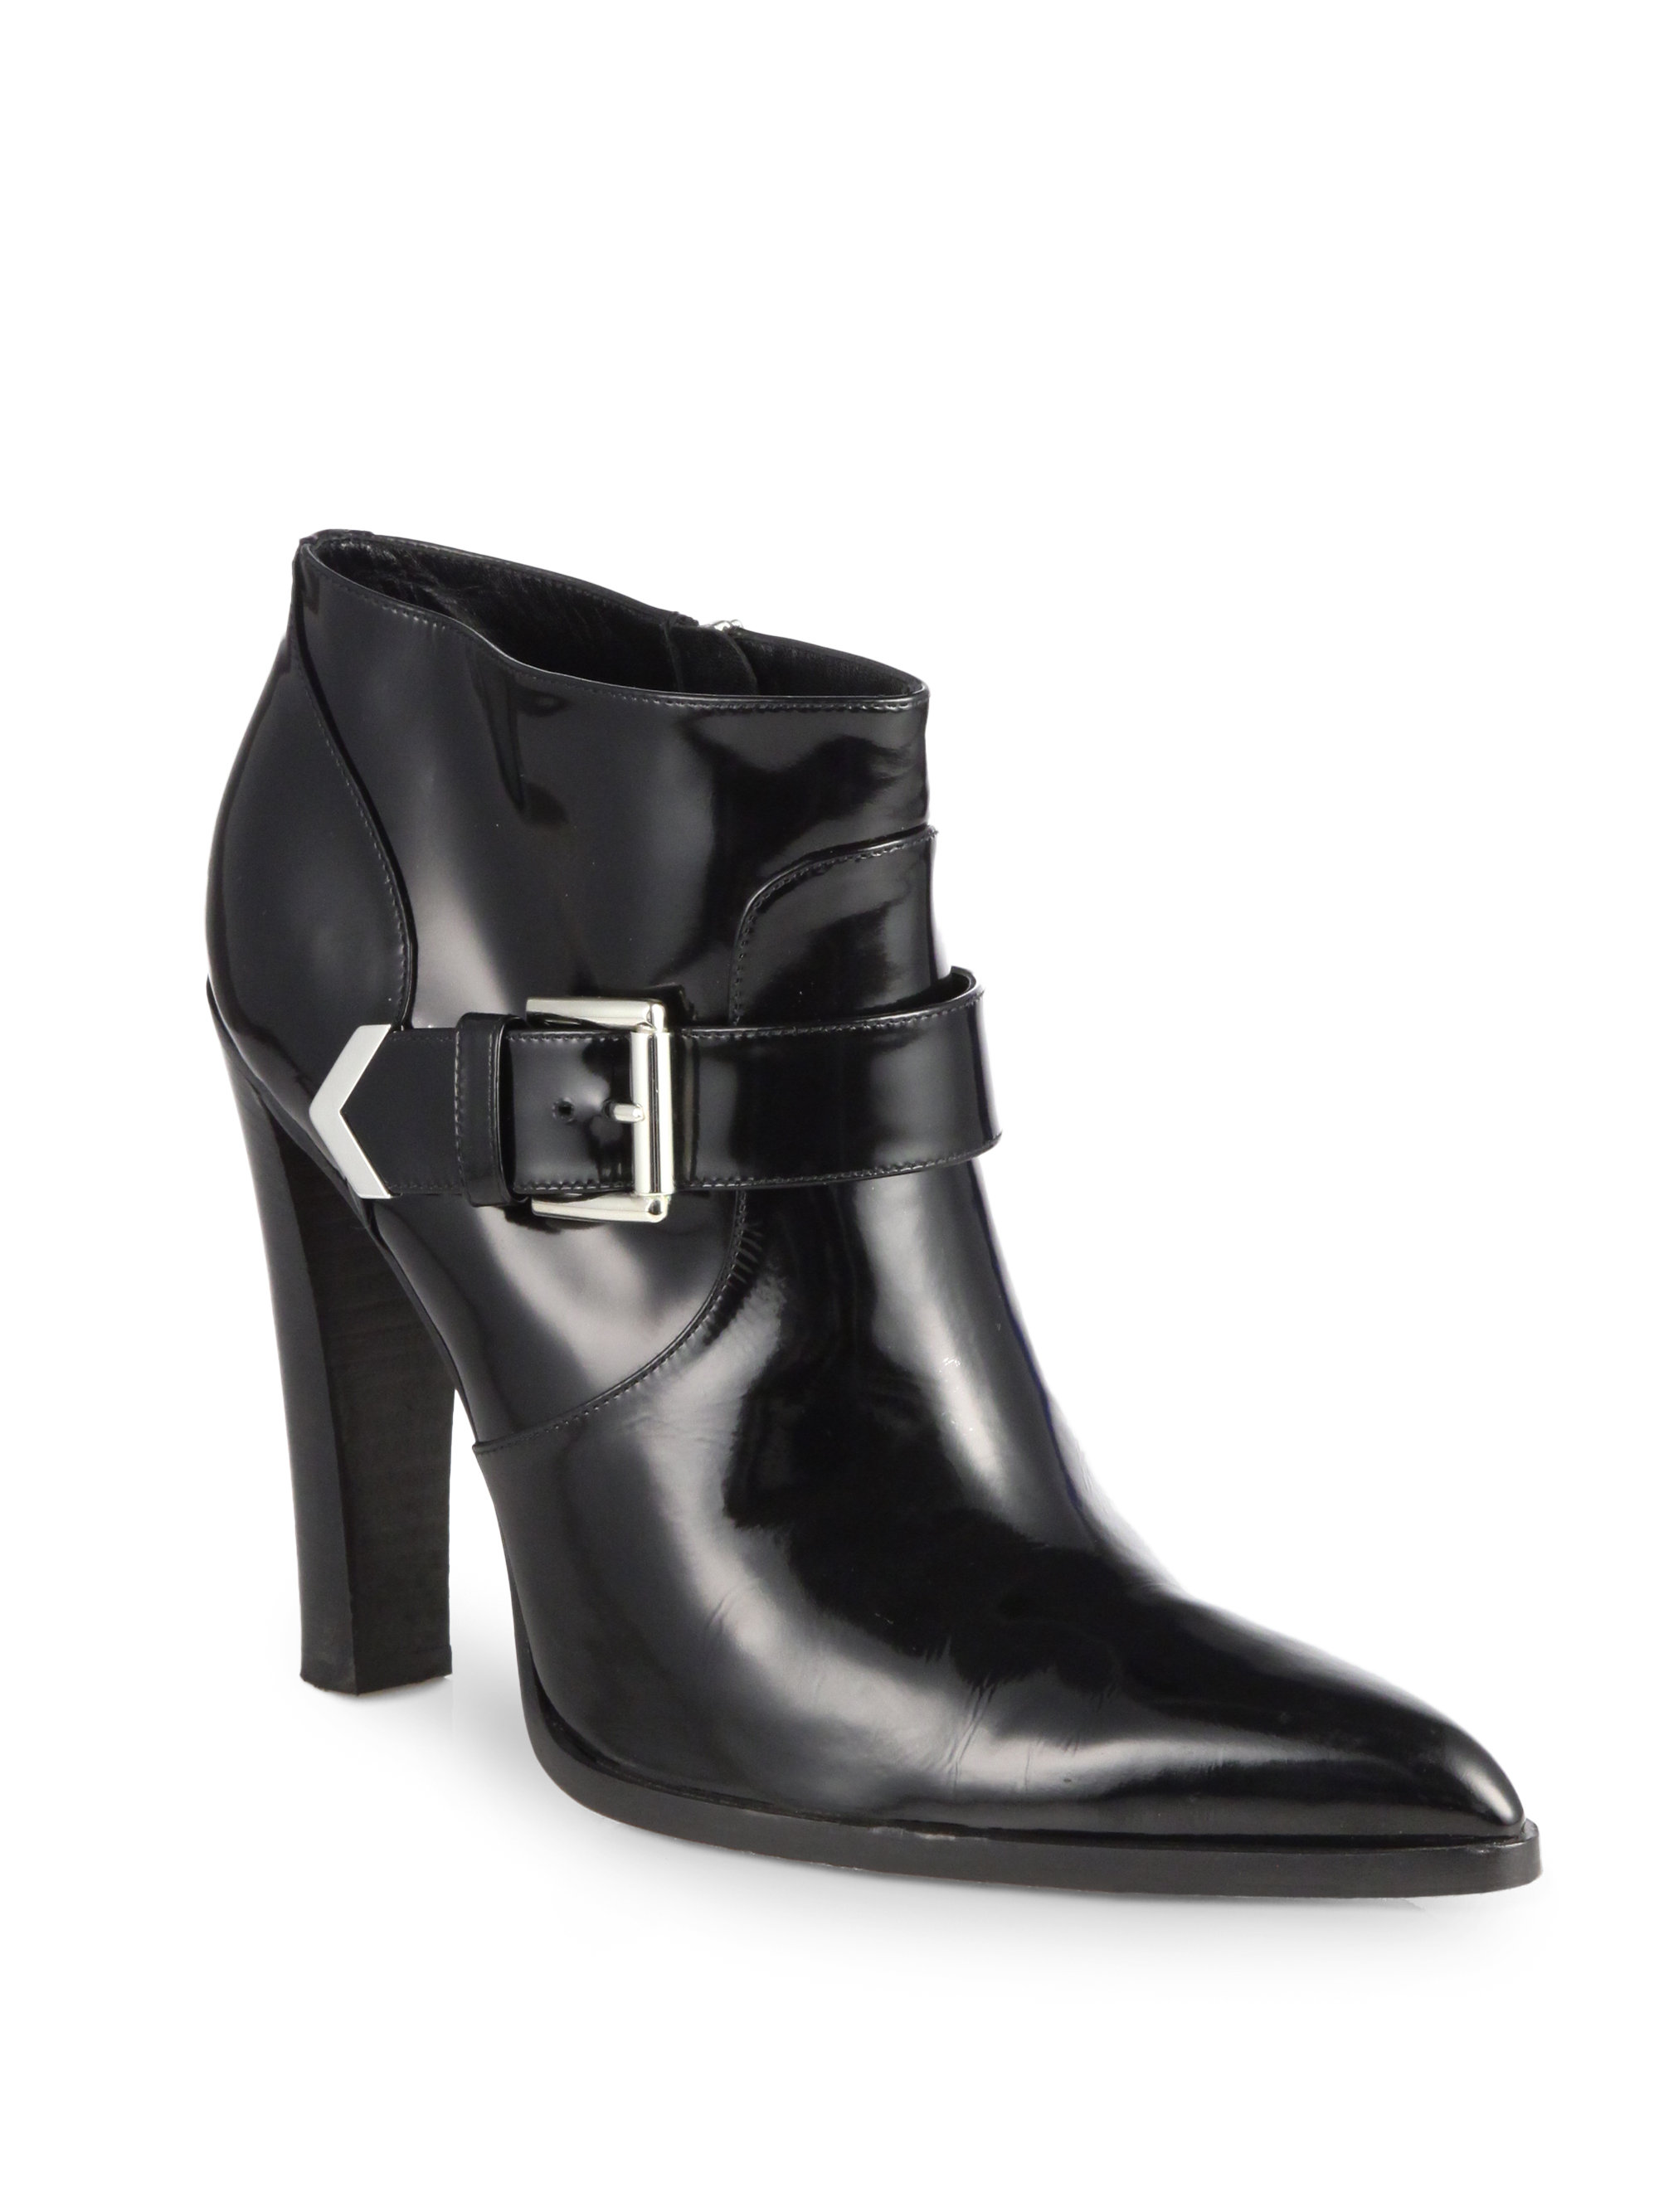 Lyst - Altuzarra Patent Leather Ankle Boots in Black